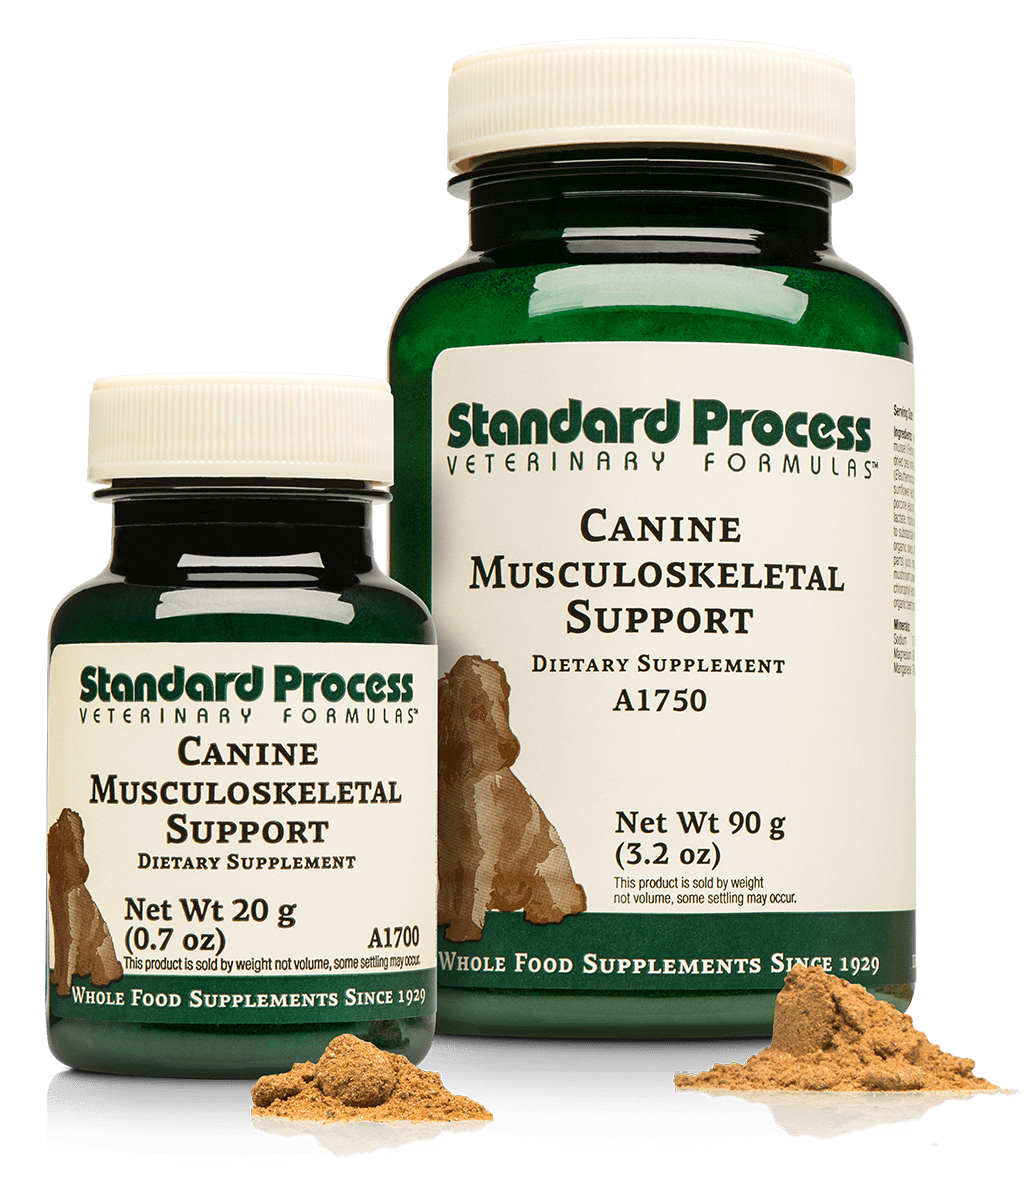 Standard Process Canine Musculoskeletal Support 20g powder